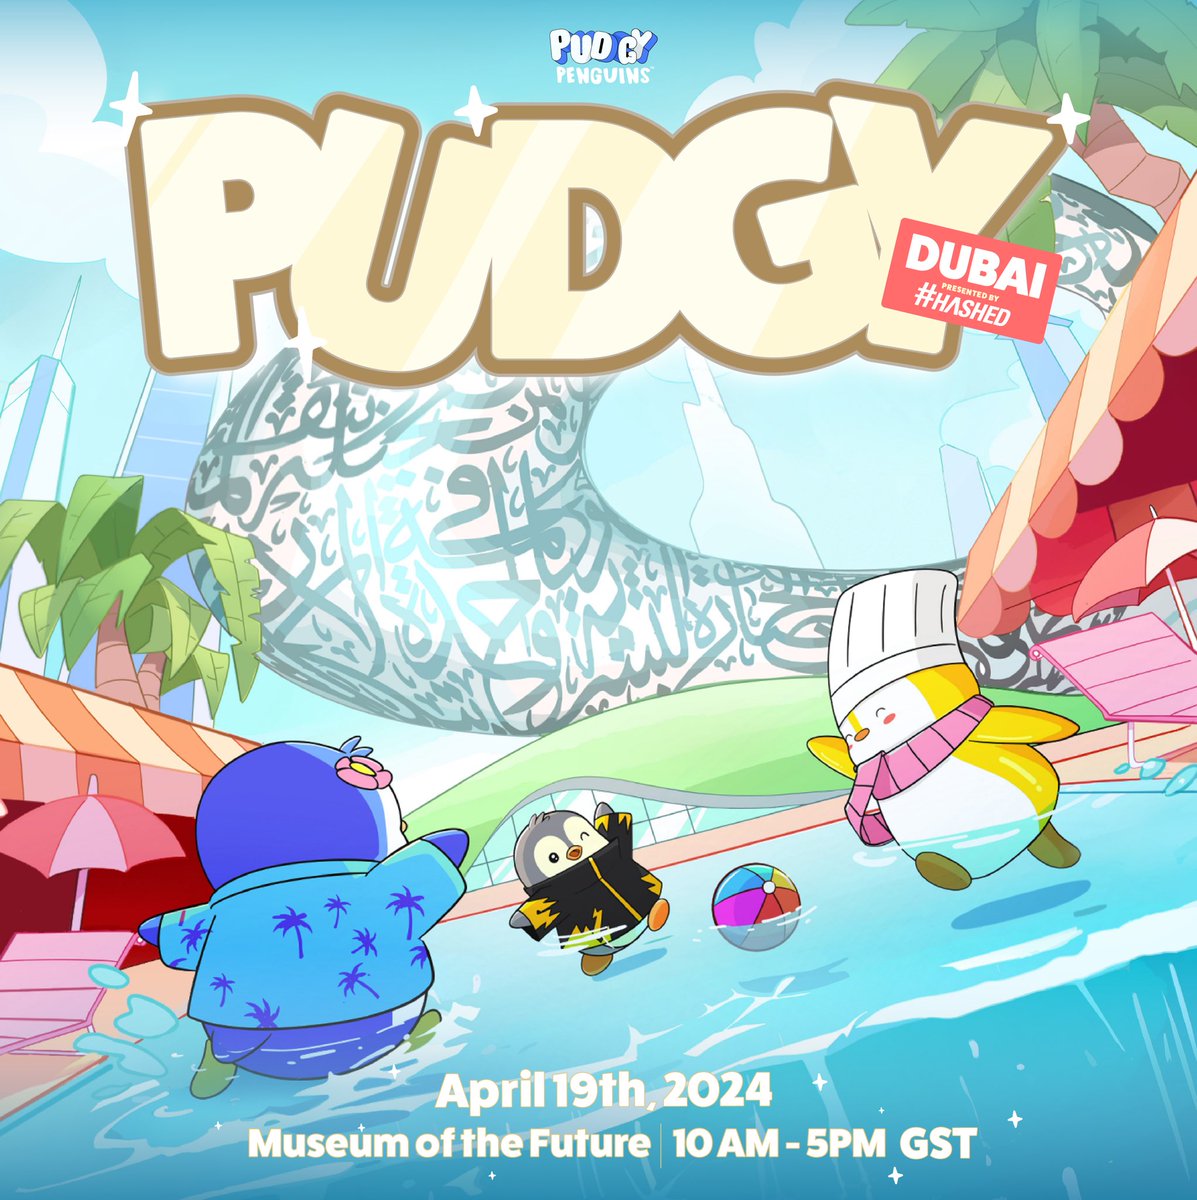 Pudgy Dubai 2024. We’re excited to announce our official Dubai Token2049 event that will take place on April 19th, 2024 from 10am to 5pm GST. RSVP information below.